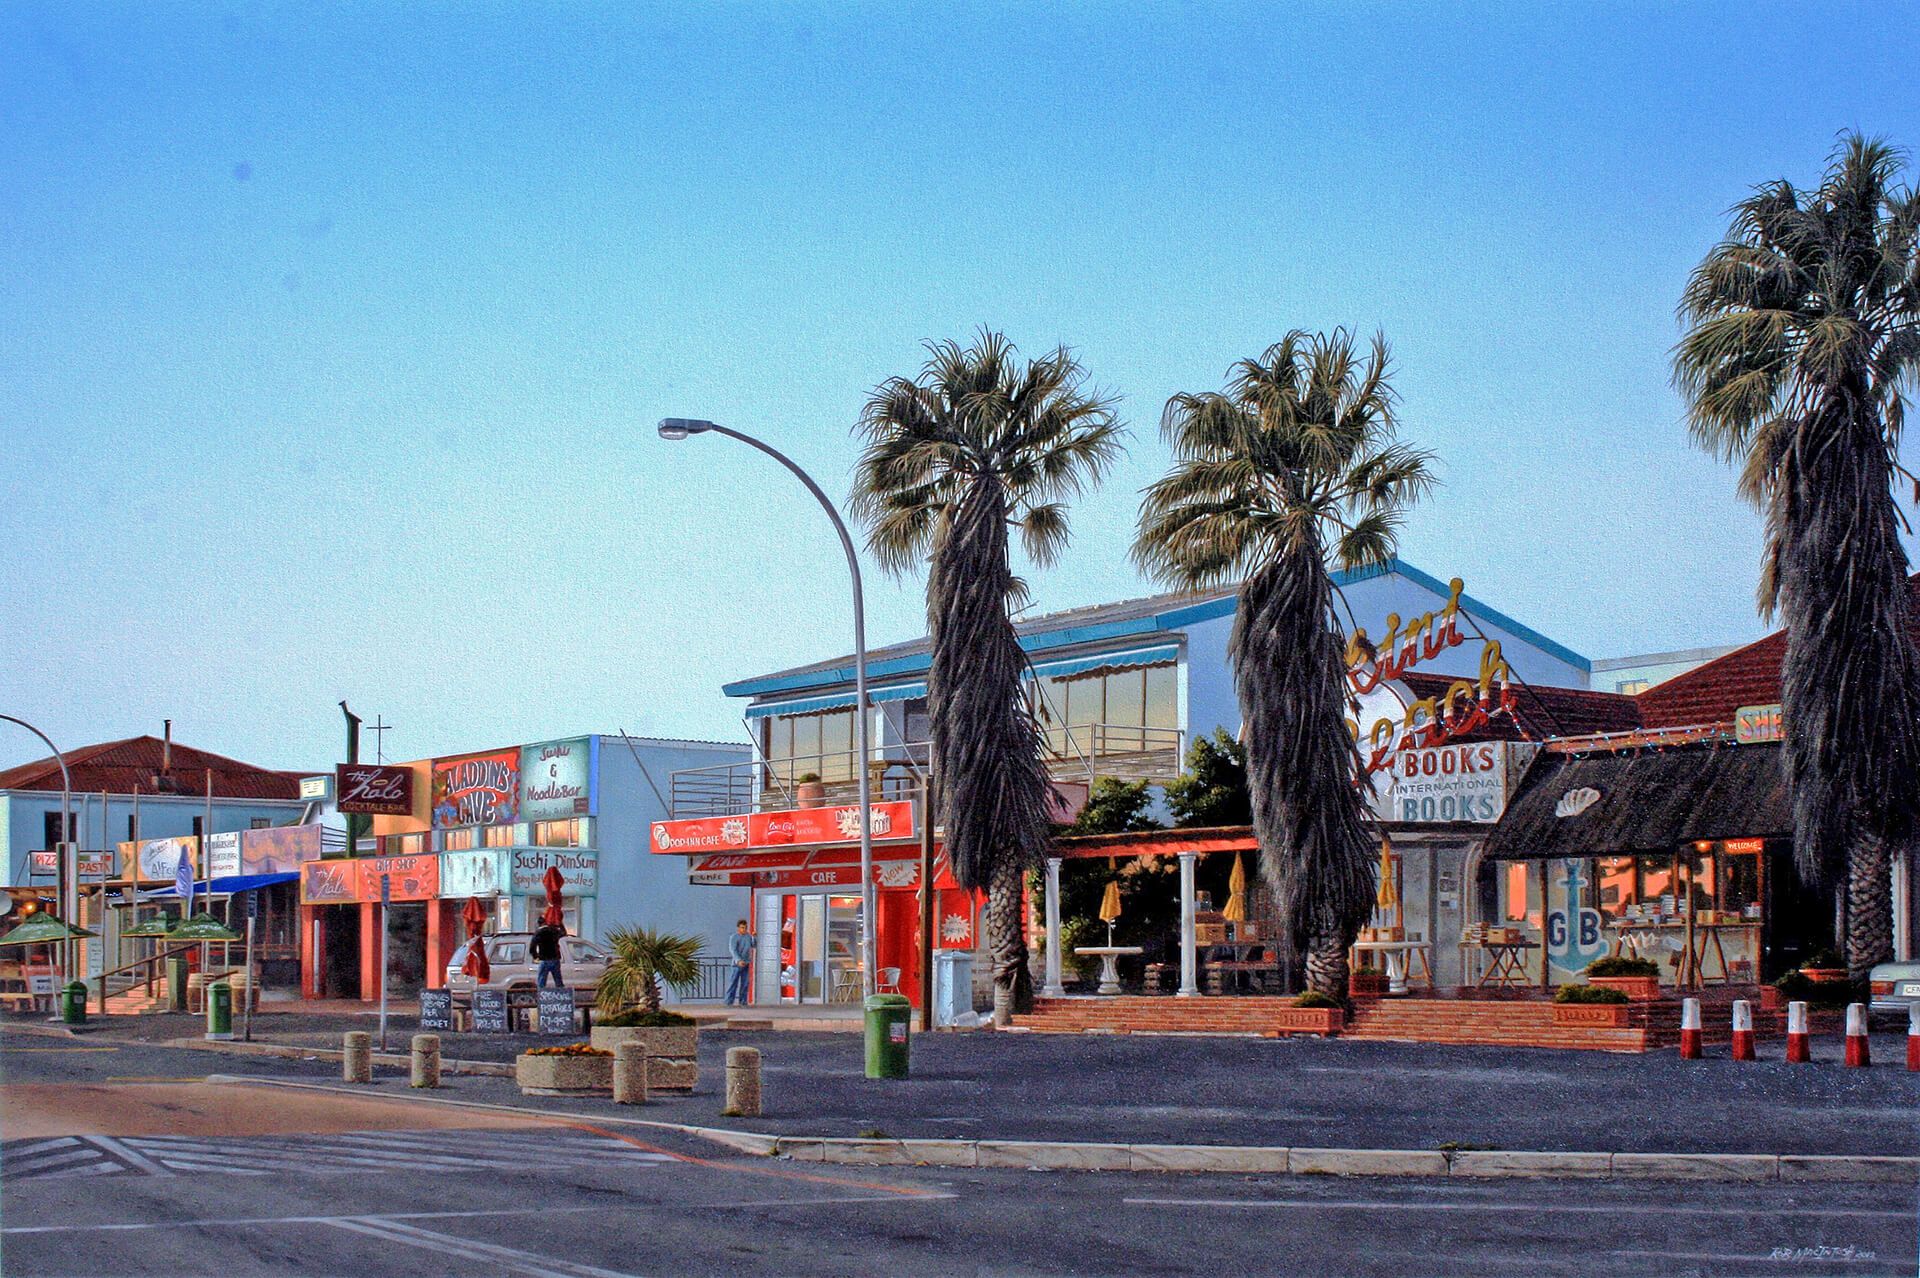 Photorealistic painting of a strip of stores down a street